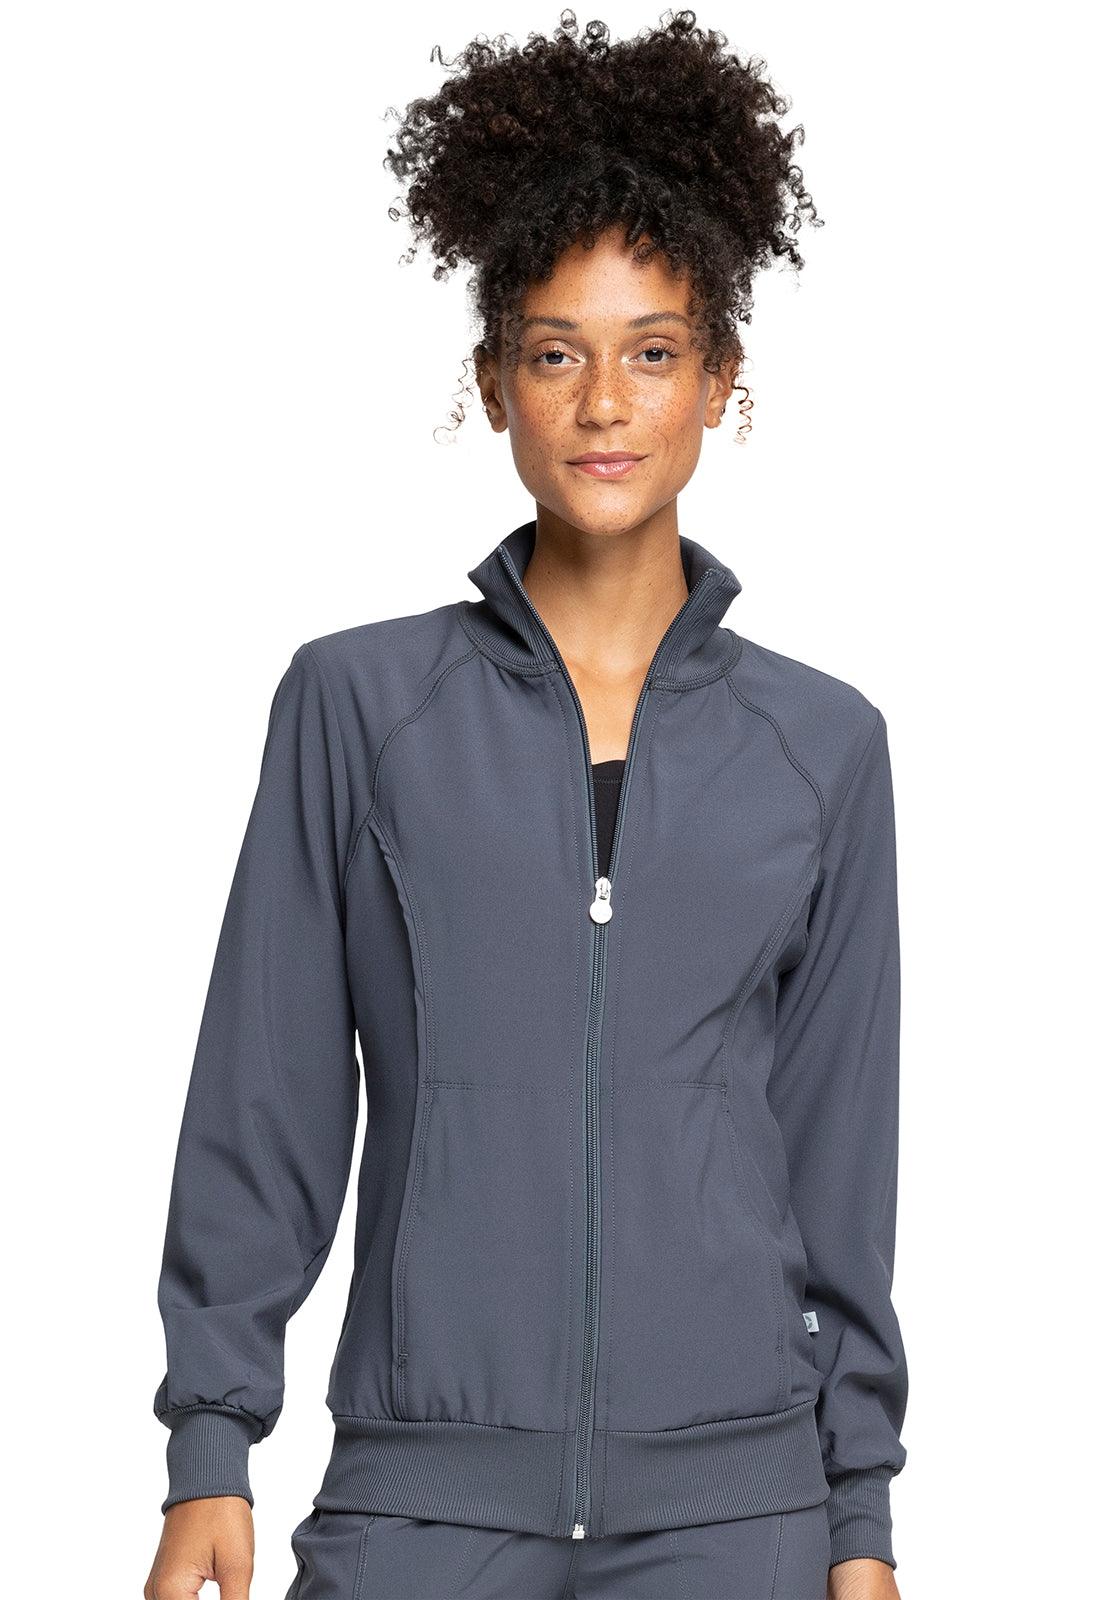 Zip Front Jacket in Pewter W/Embroidery (Radiography Program) - Jay's Uniform